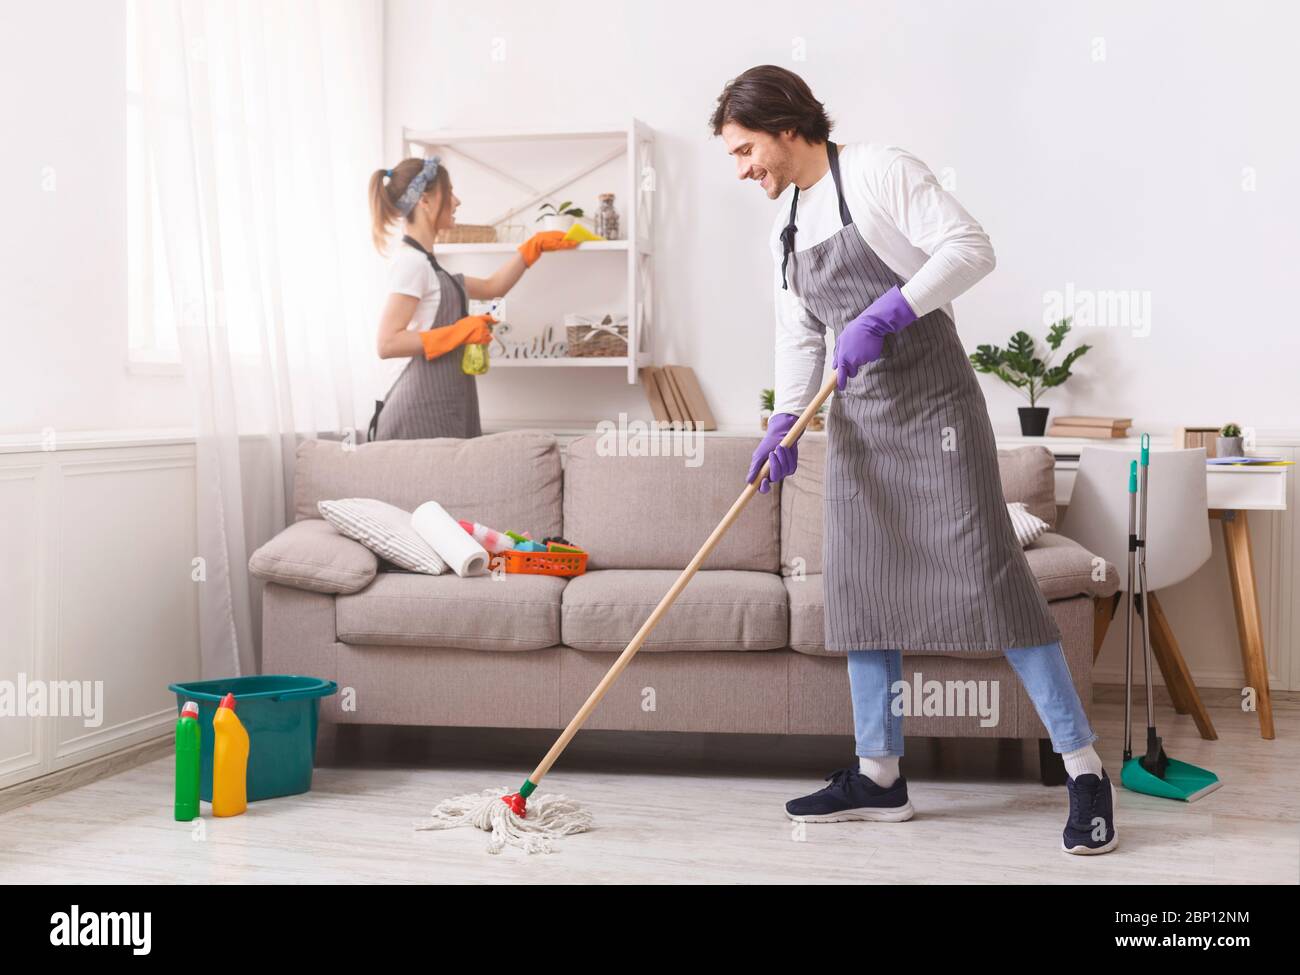 Residential Cleaning Services. Couple Of Skilled Housekeepers Tidying Up Apartment Stock Photo